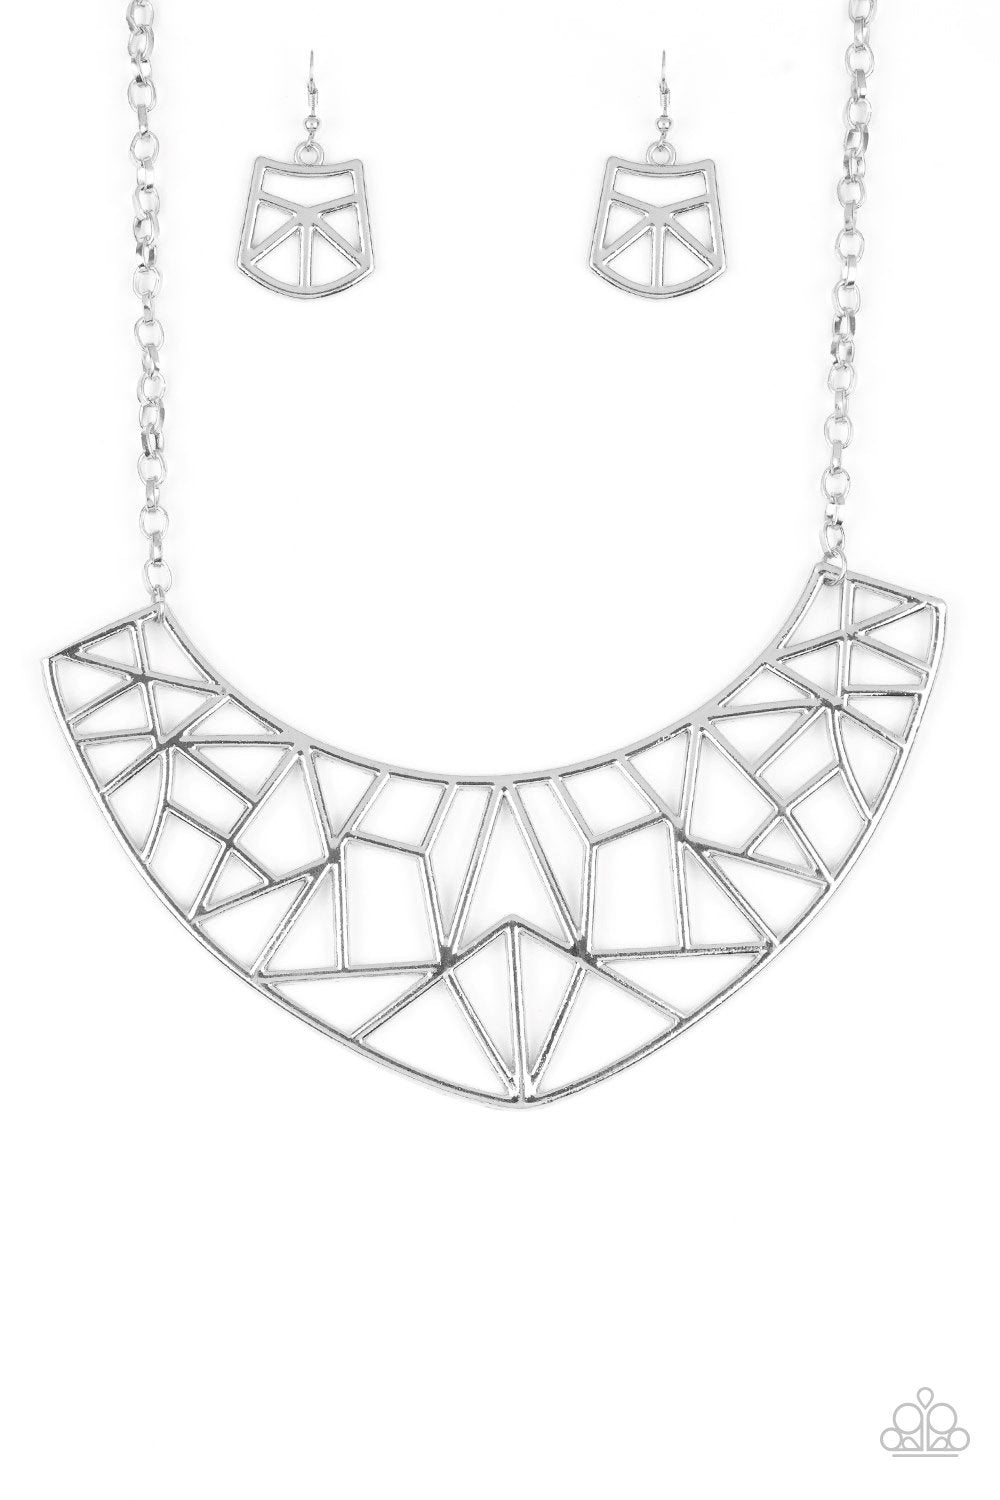 Strike While Haute Silver Statement Necklace - Paparazzi Accessories-CarasShop.com - $5 Jewelry by Cara Jewels